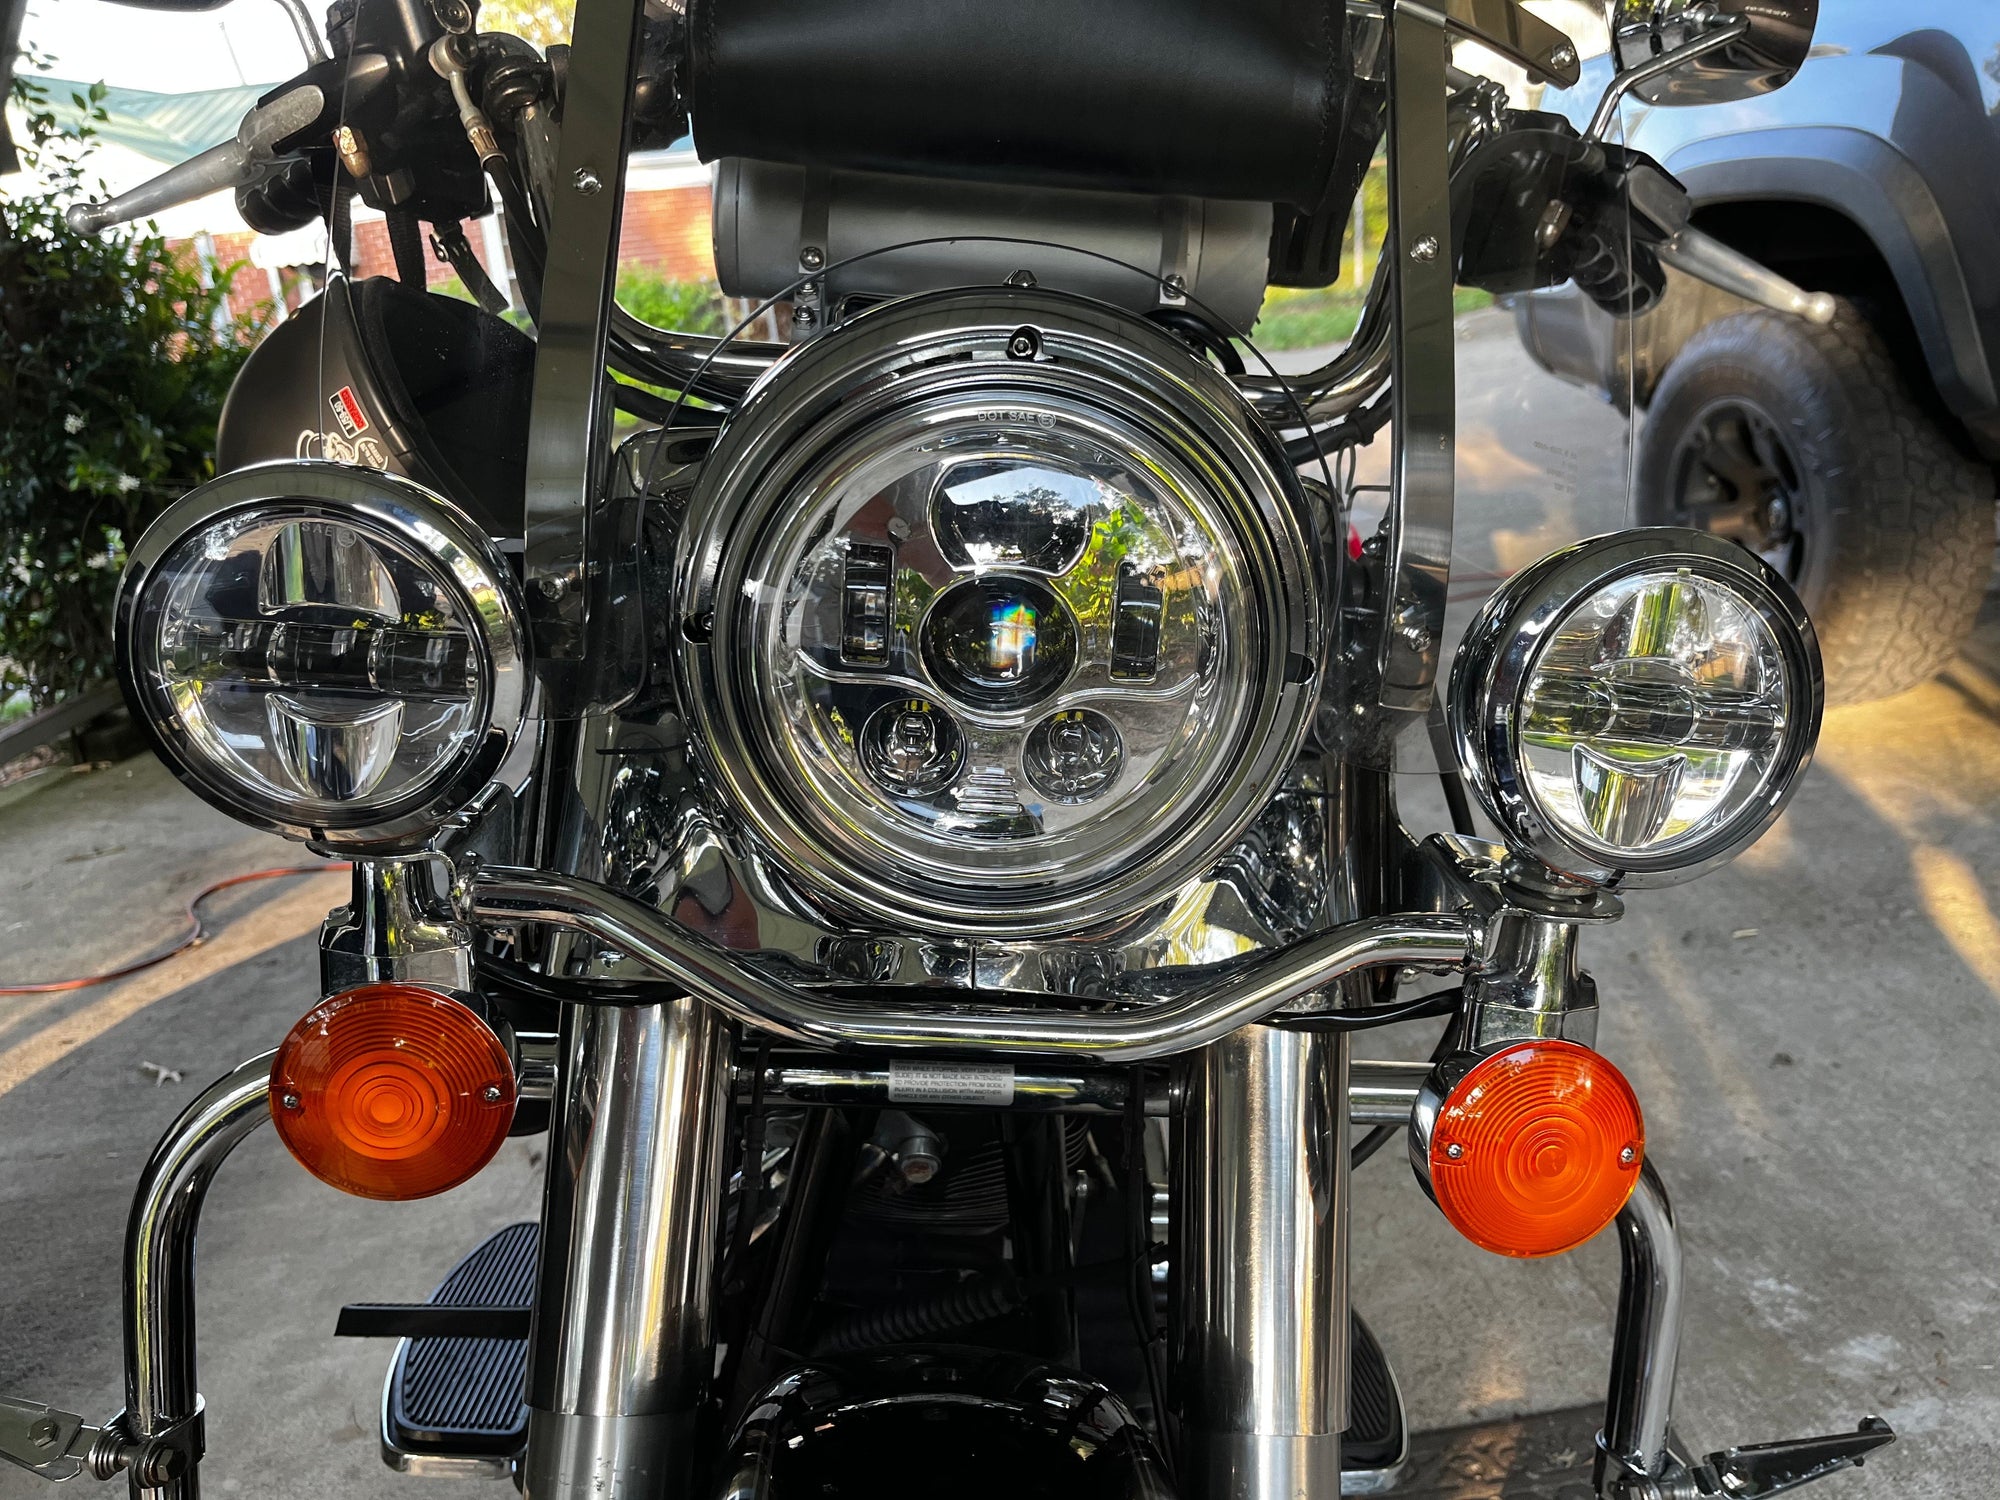 The Benefits of Motorcycle Safety Gear Beyond Helmets